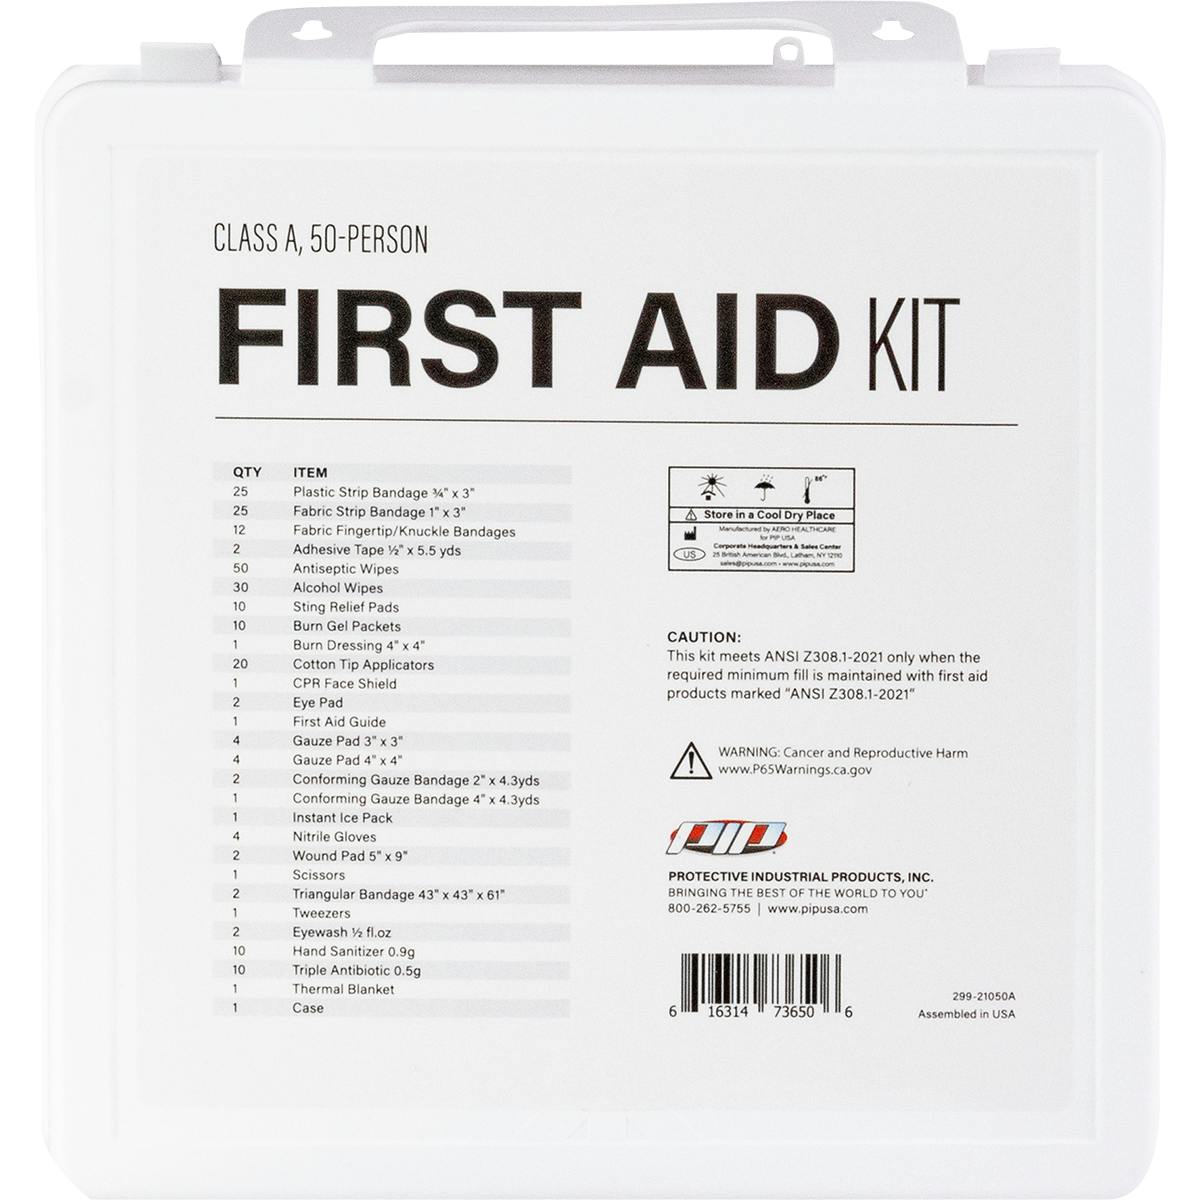 ANSI Class A Waterproof First Aid Kit - 50 Person, White (299-21050A) - KIT